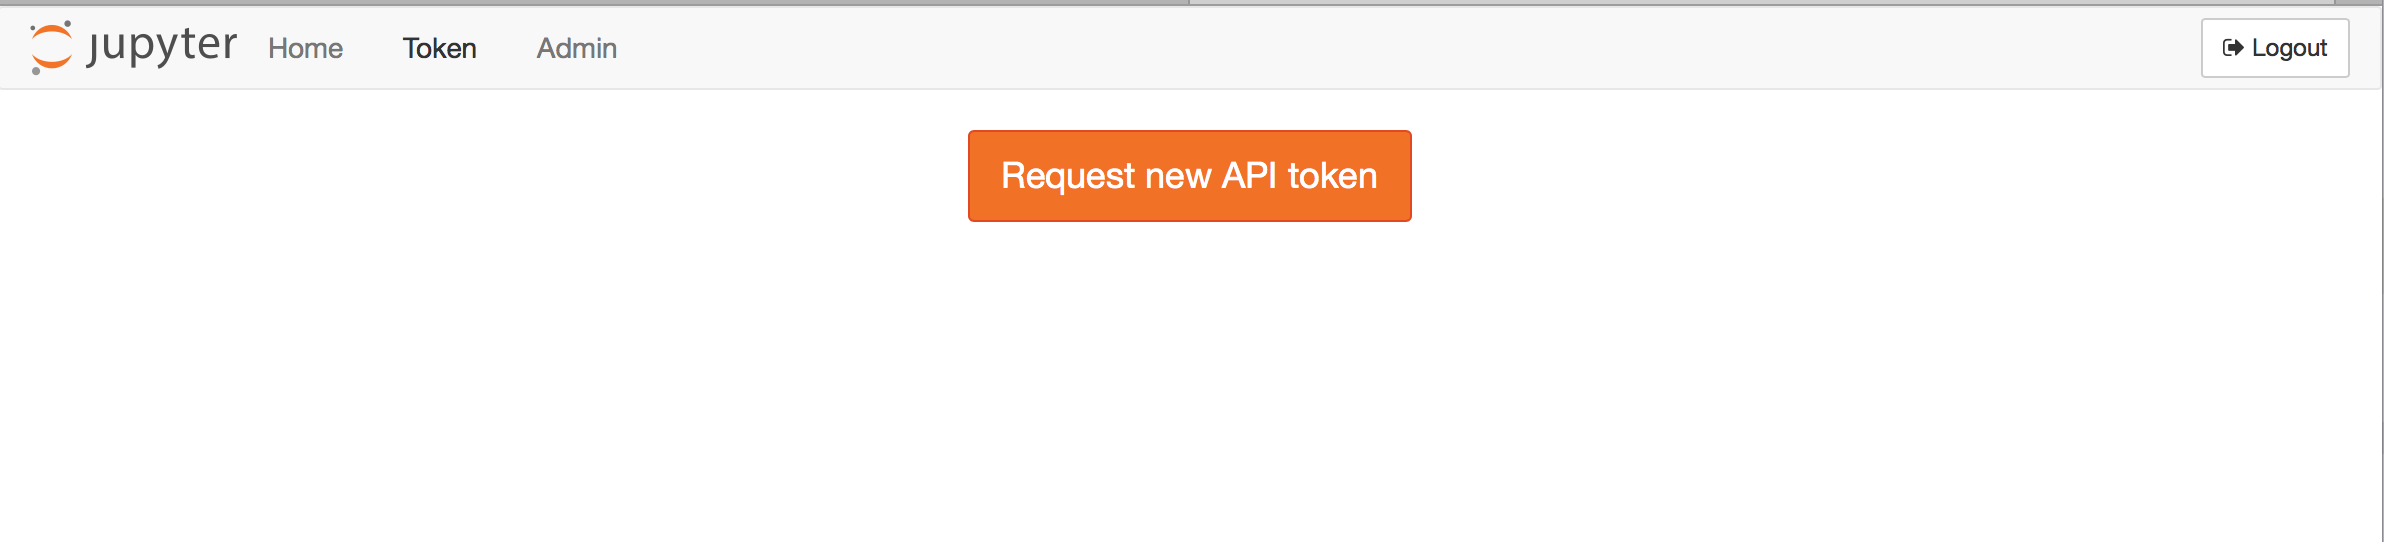 Request API TOKEN page